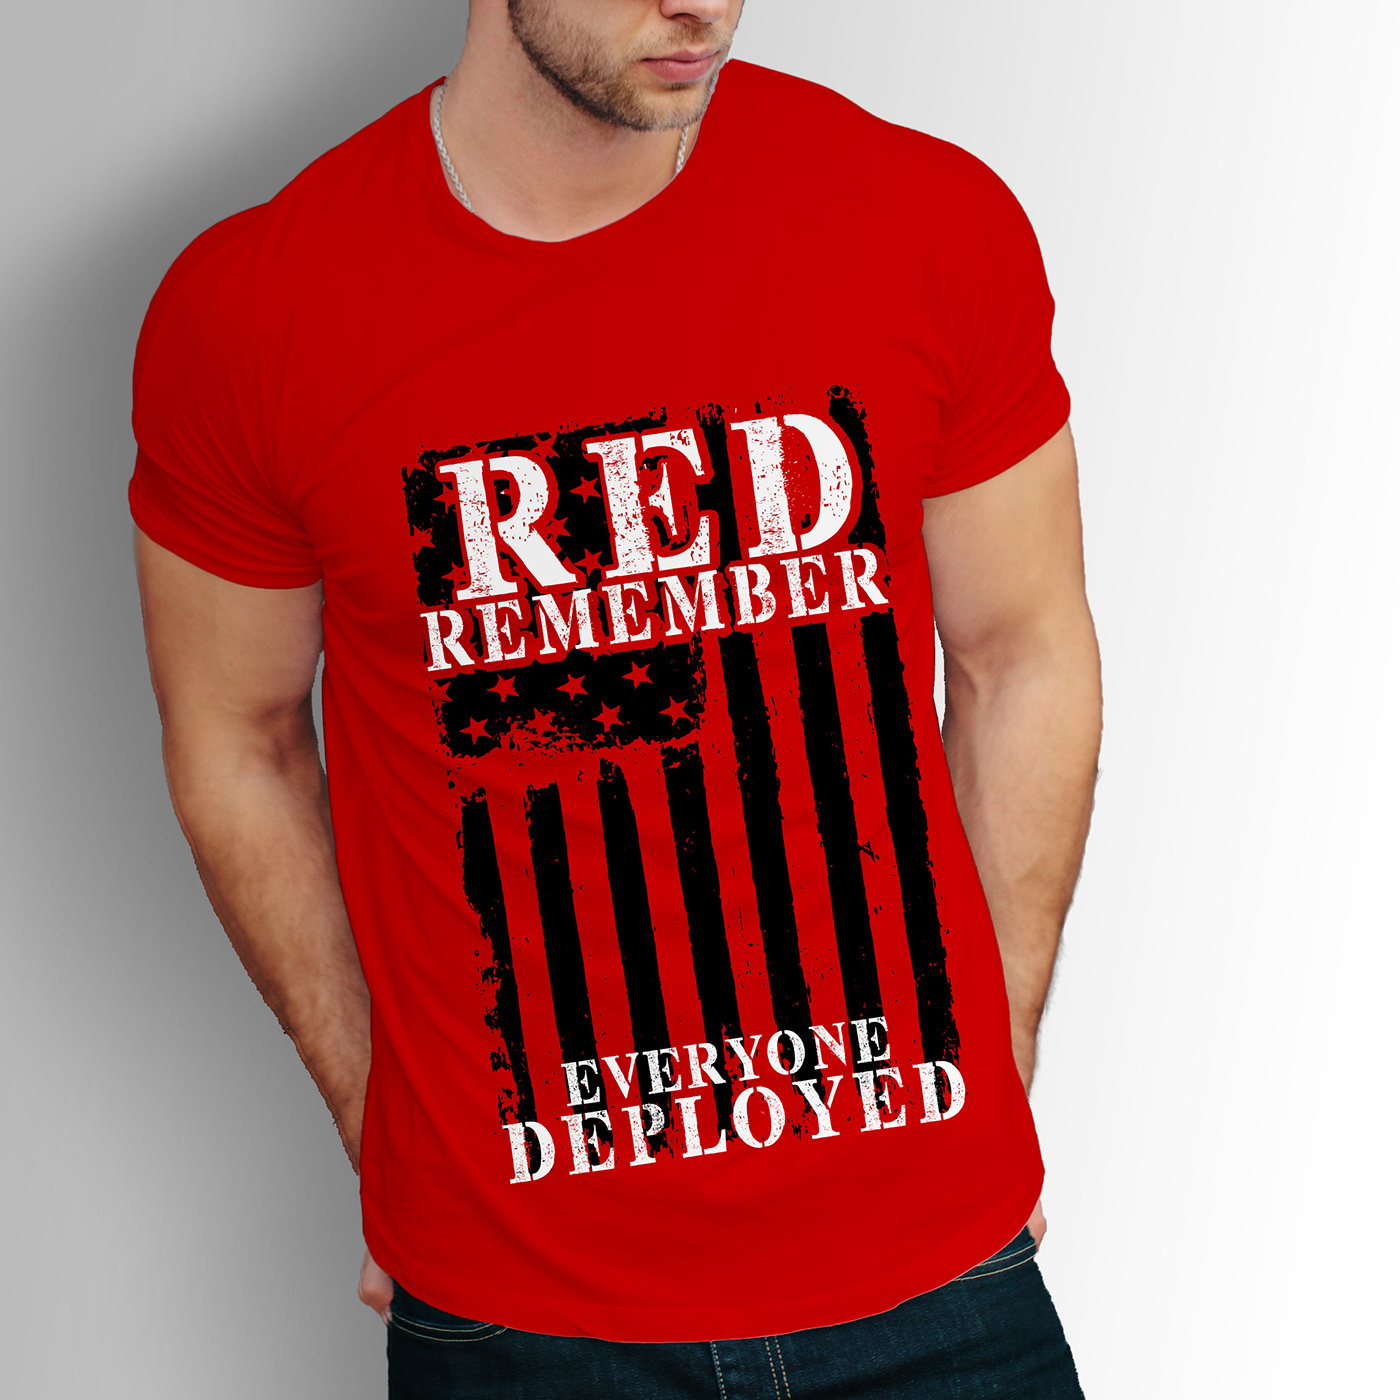 Red remember everyone deployed Usa police t-shirt design Thin Blue Line Flag T-Shirt design